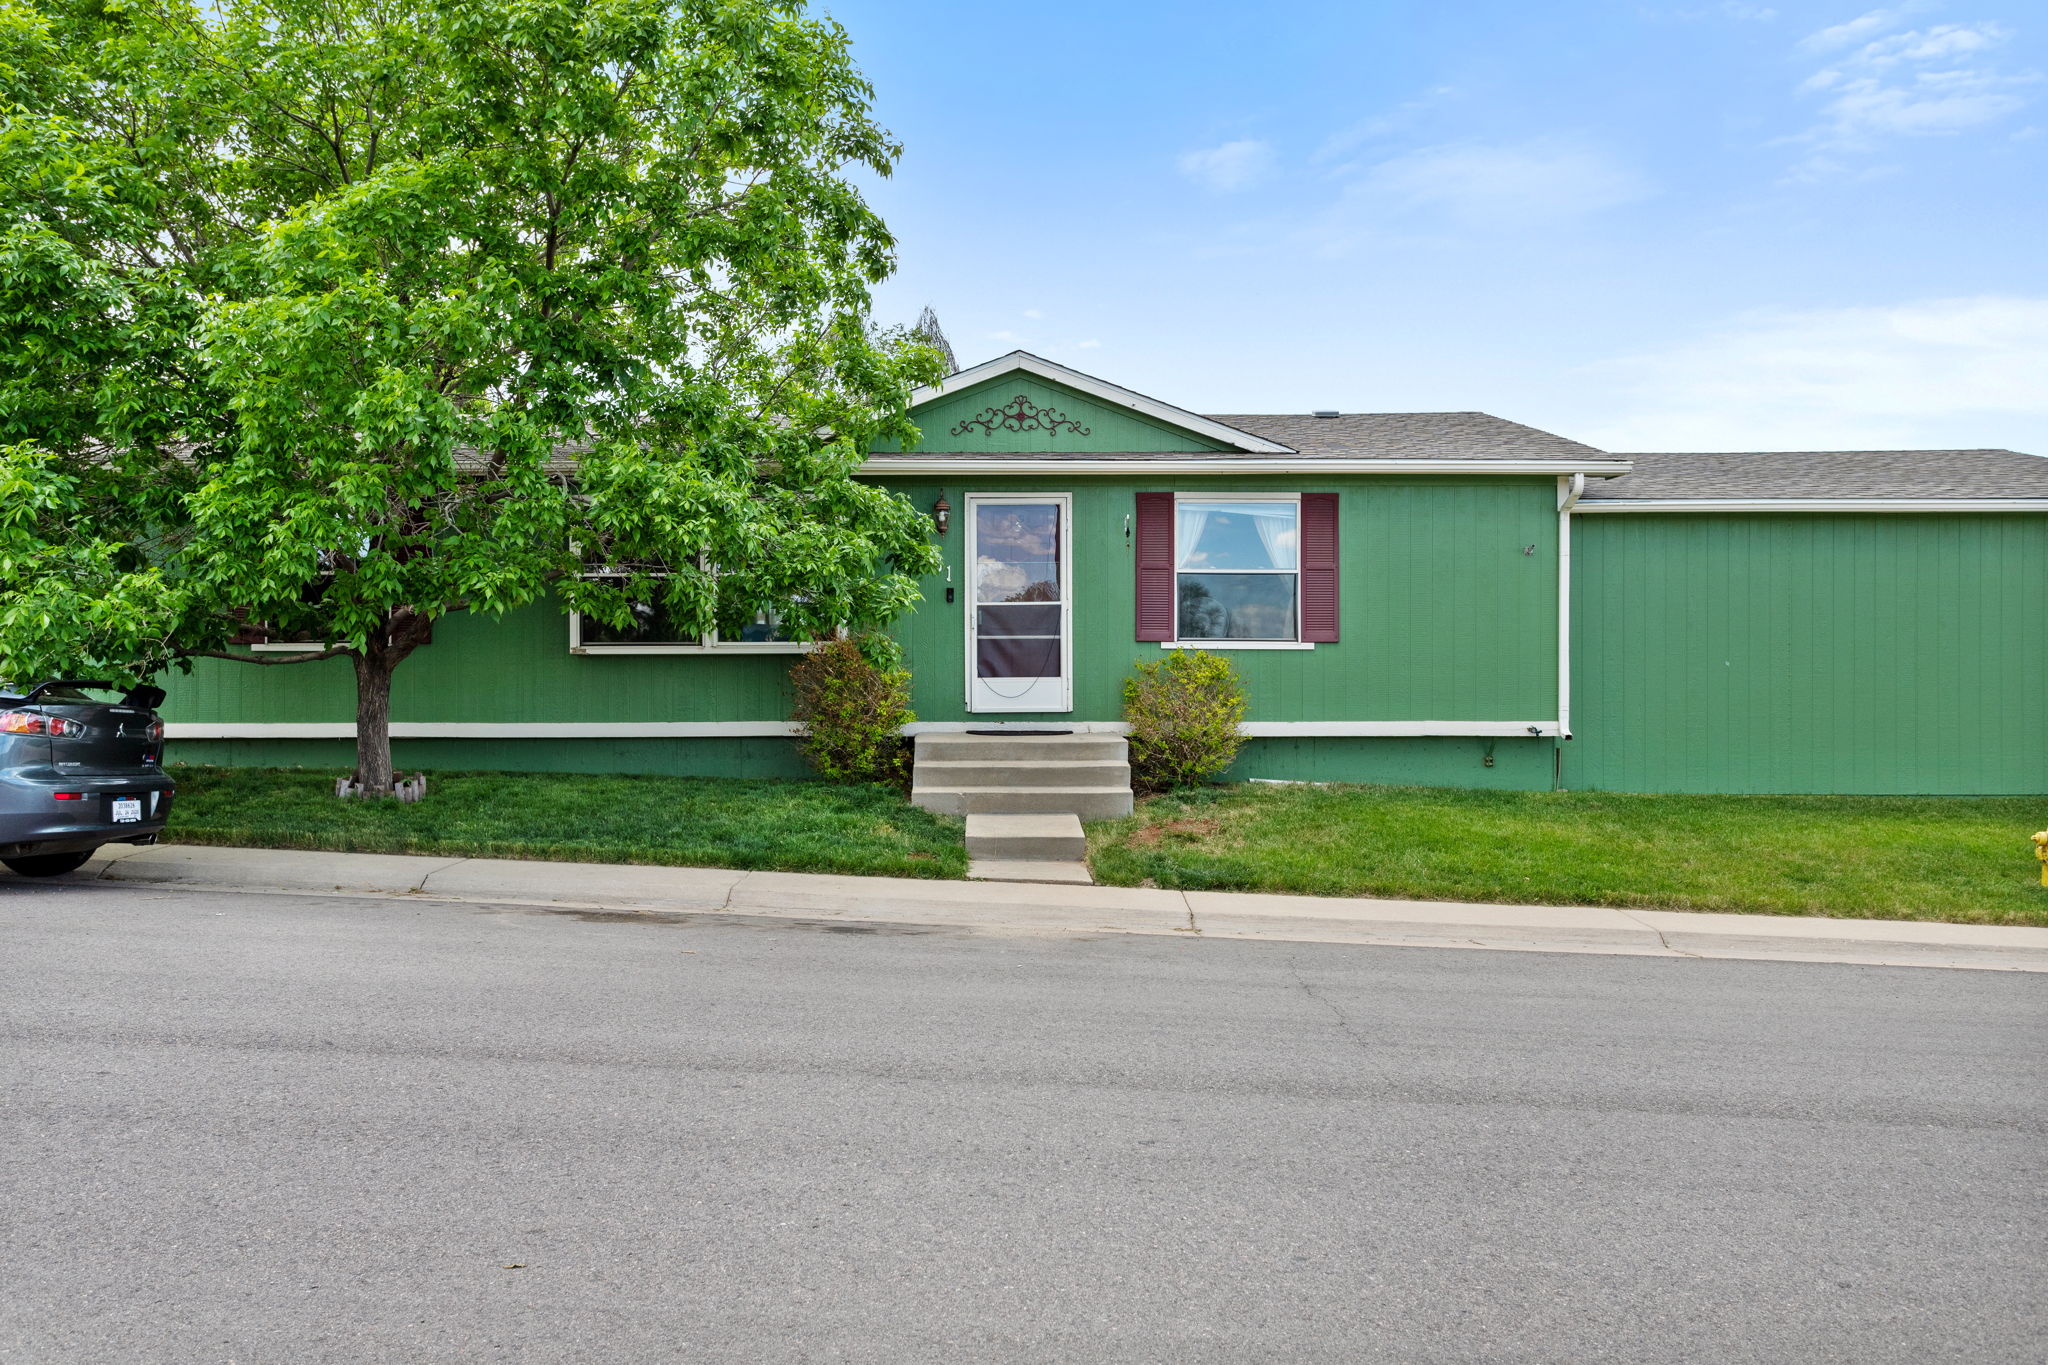  9181 Fayette St, Federal Heights, CO 80260, US